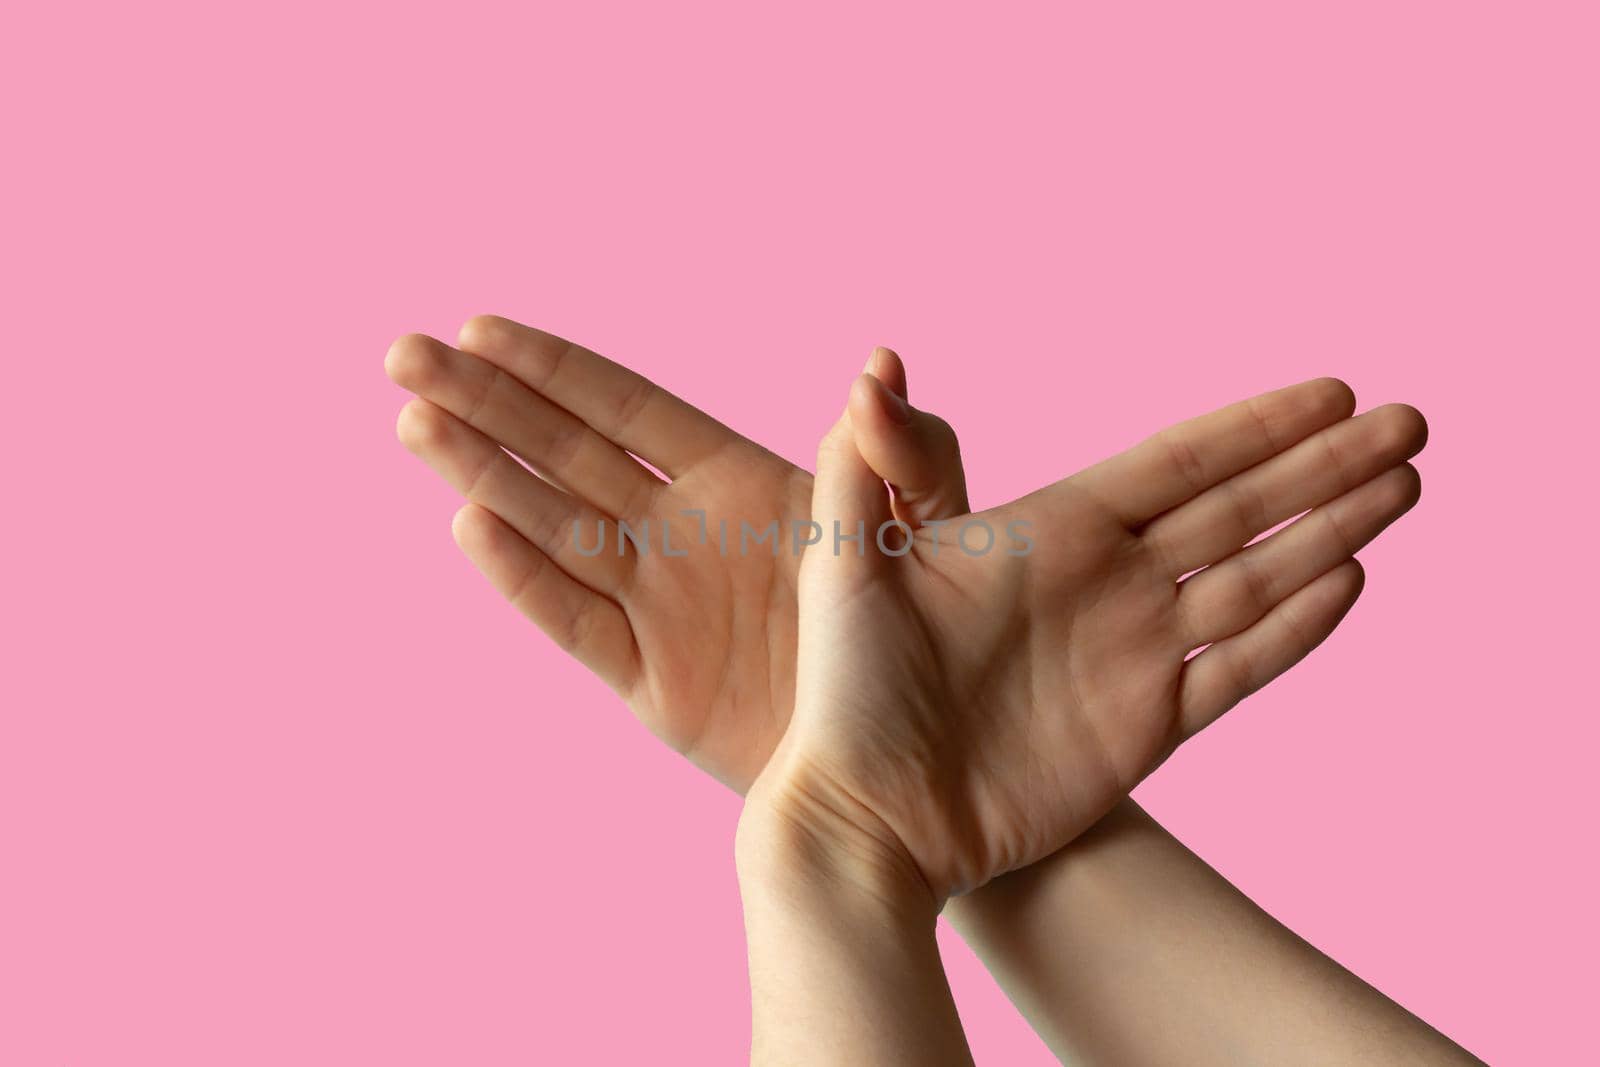 Silhouette of a hand gesture similar to a bird flying on a pink background.